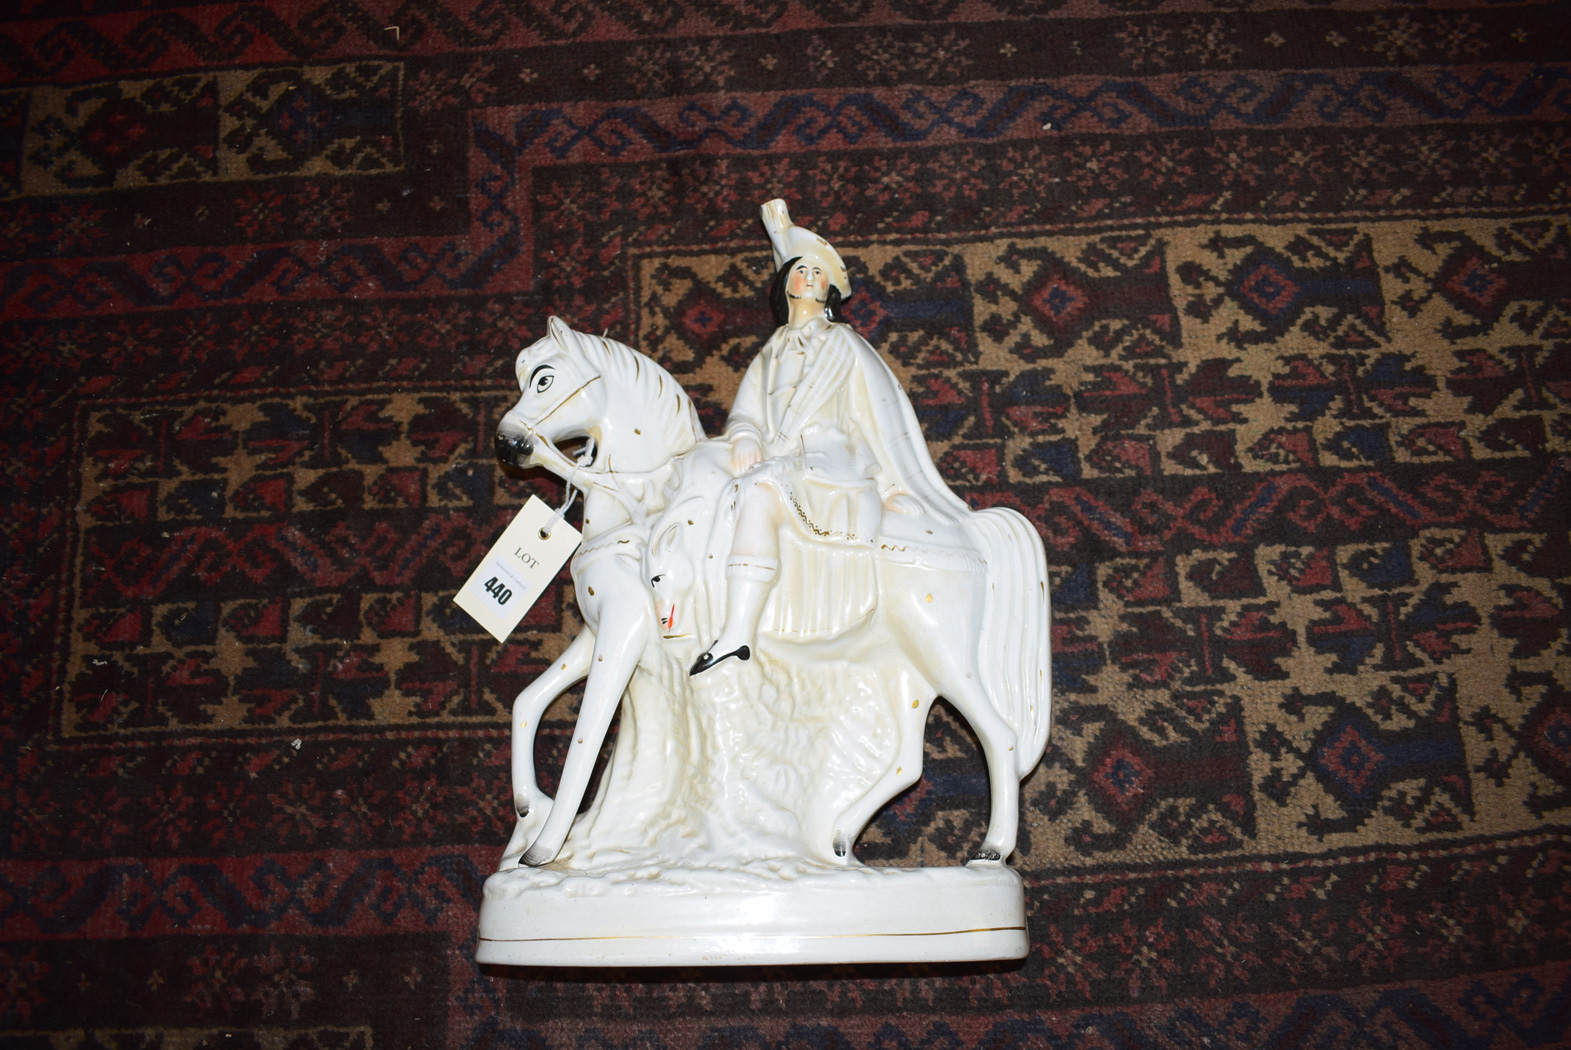 A Staffordshire figure of a man on horseback with gilded highlights.